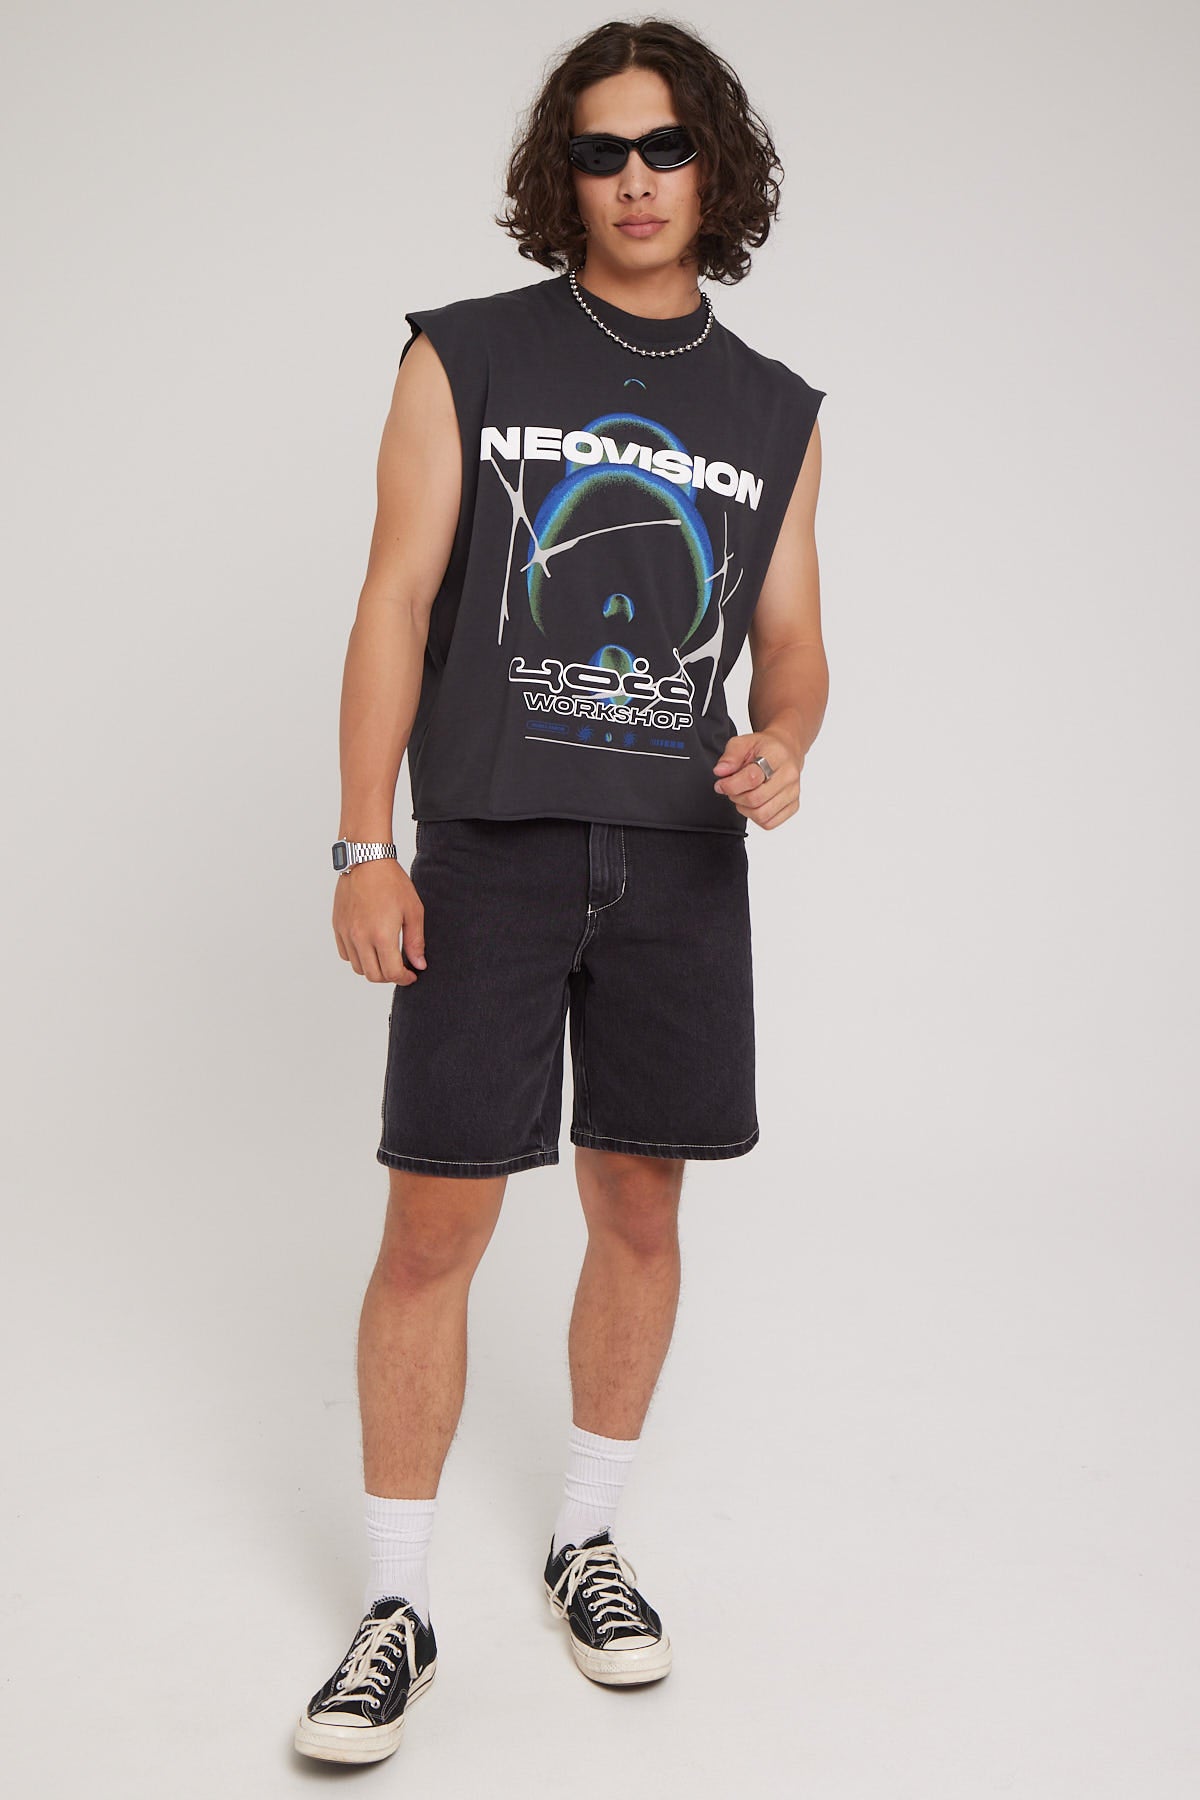 Neovision Exoplanet Cropped Muscle Tank Washed Black